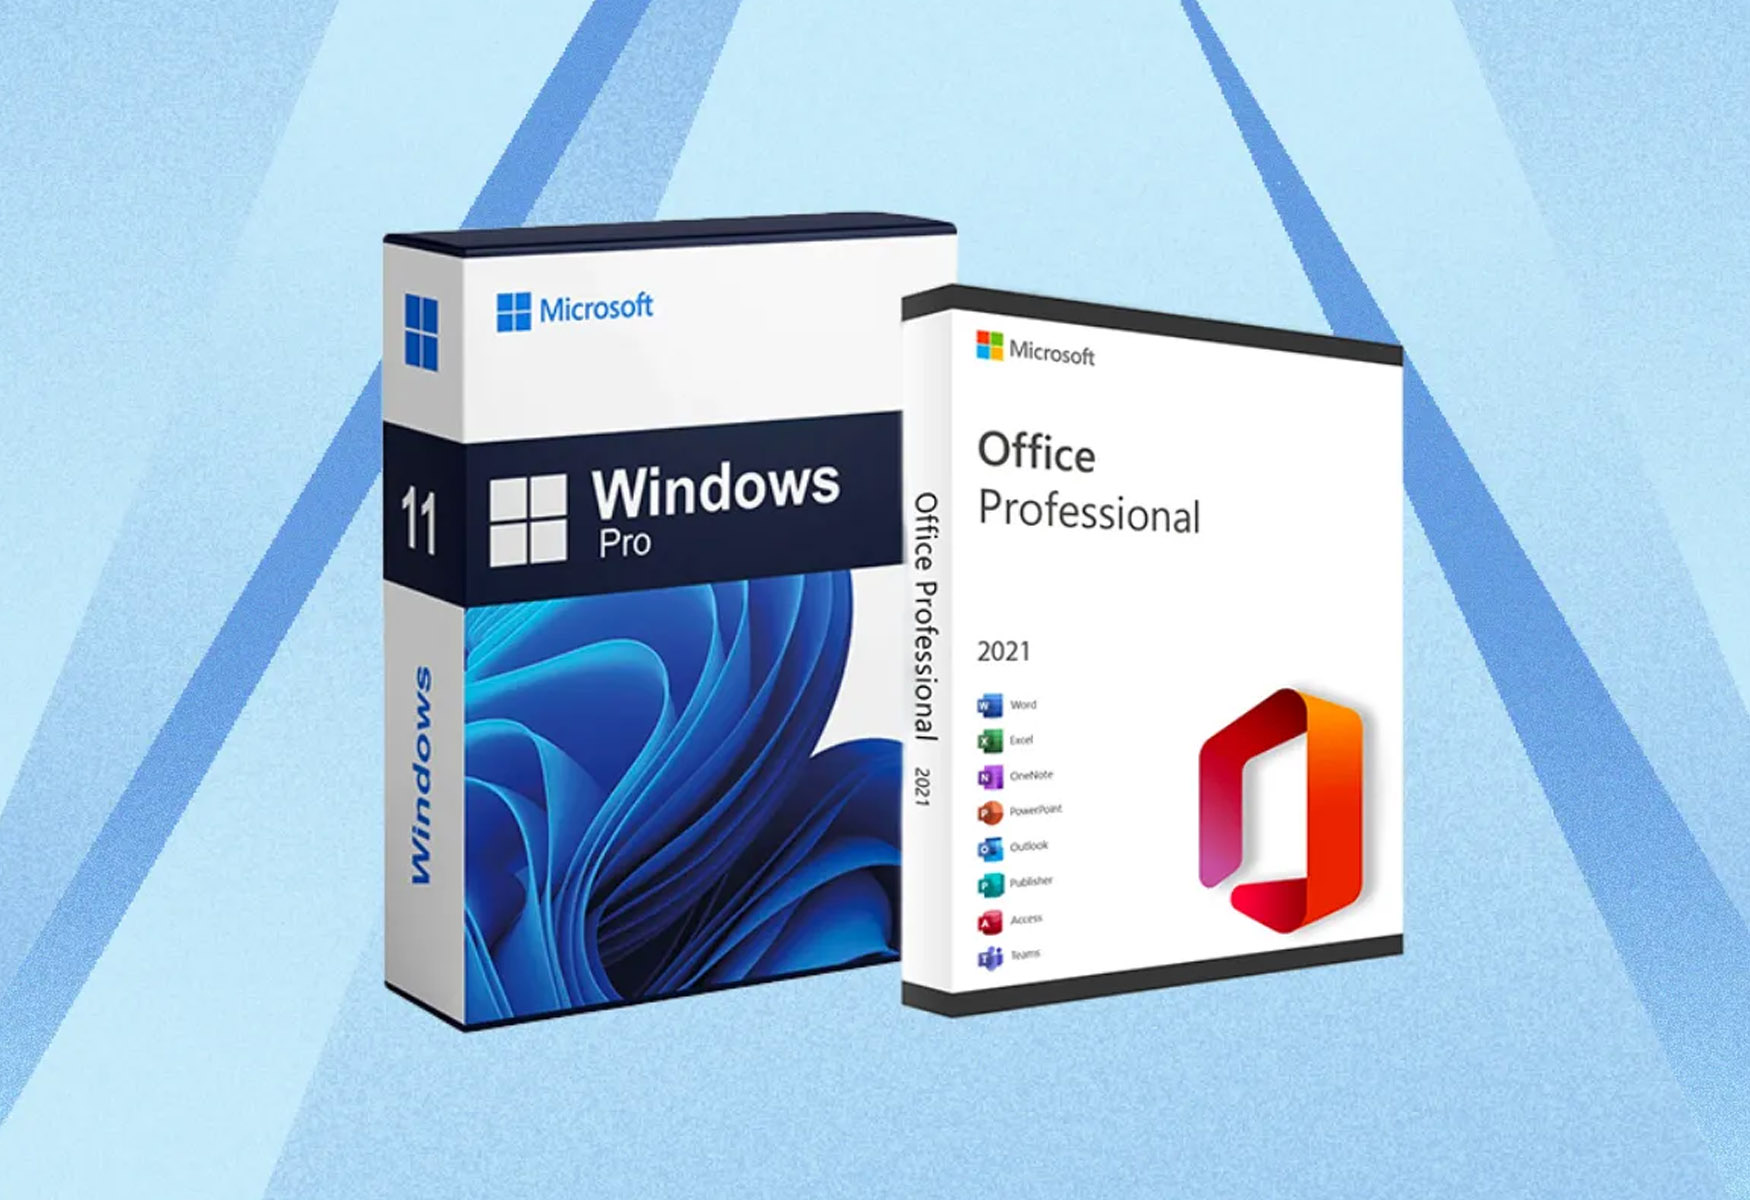 Cyber Week Deal: Get Microsoft Office And Windows 11 Pro For Just $49.97